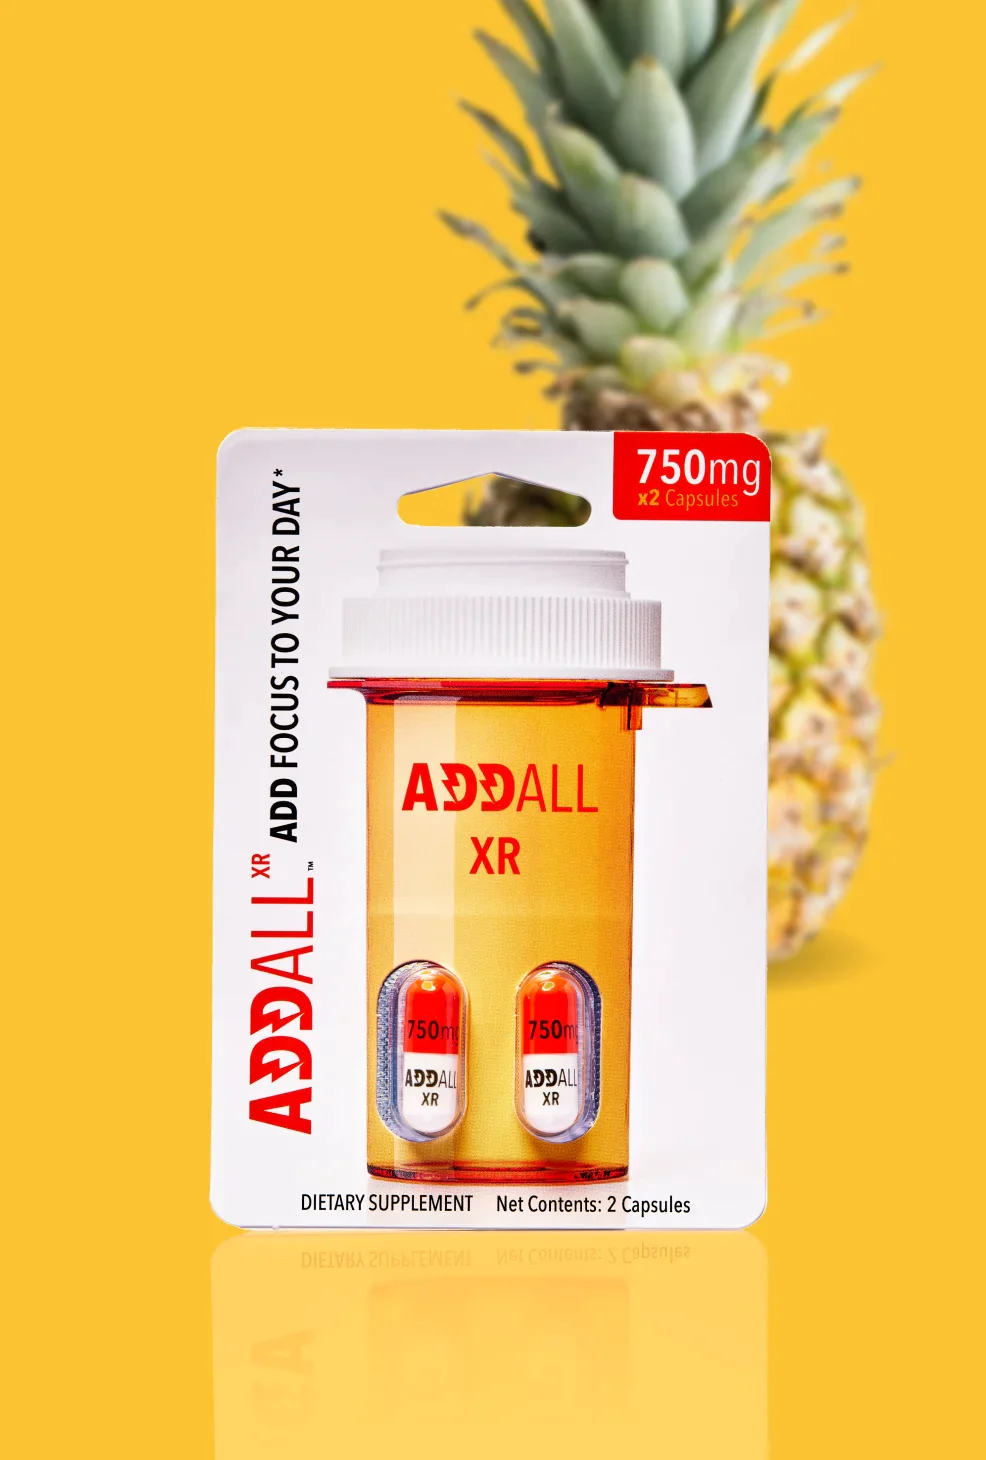 Addall XR Proprietary Blend Capsule – 750mg, 2 count